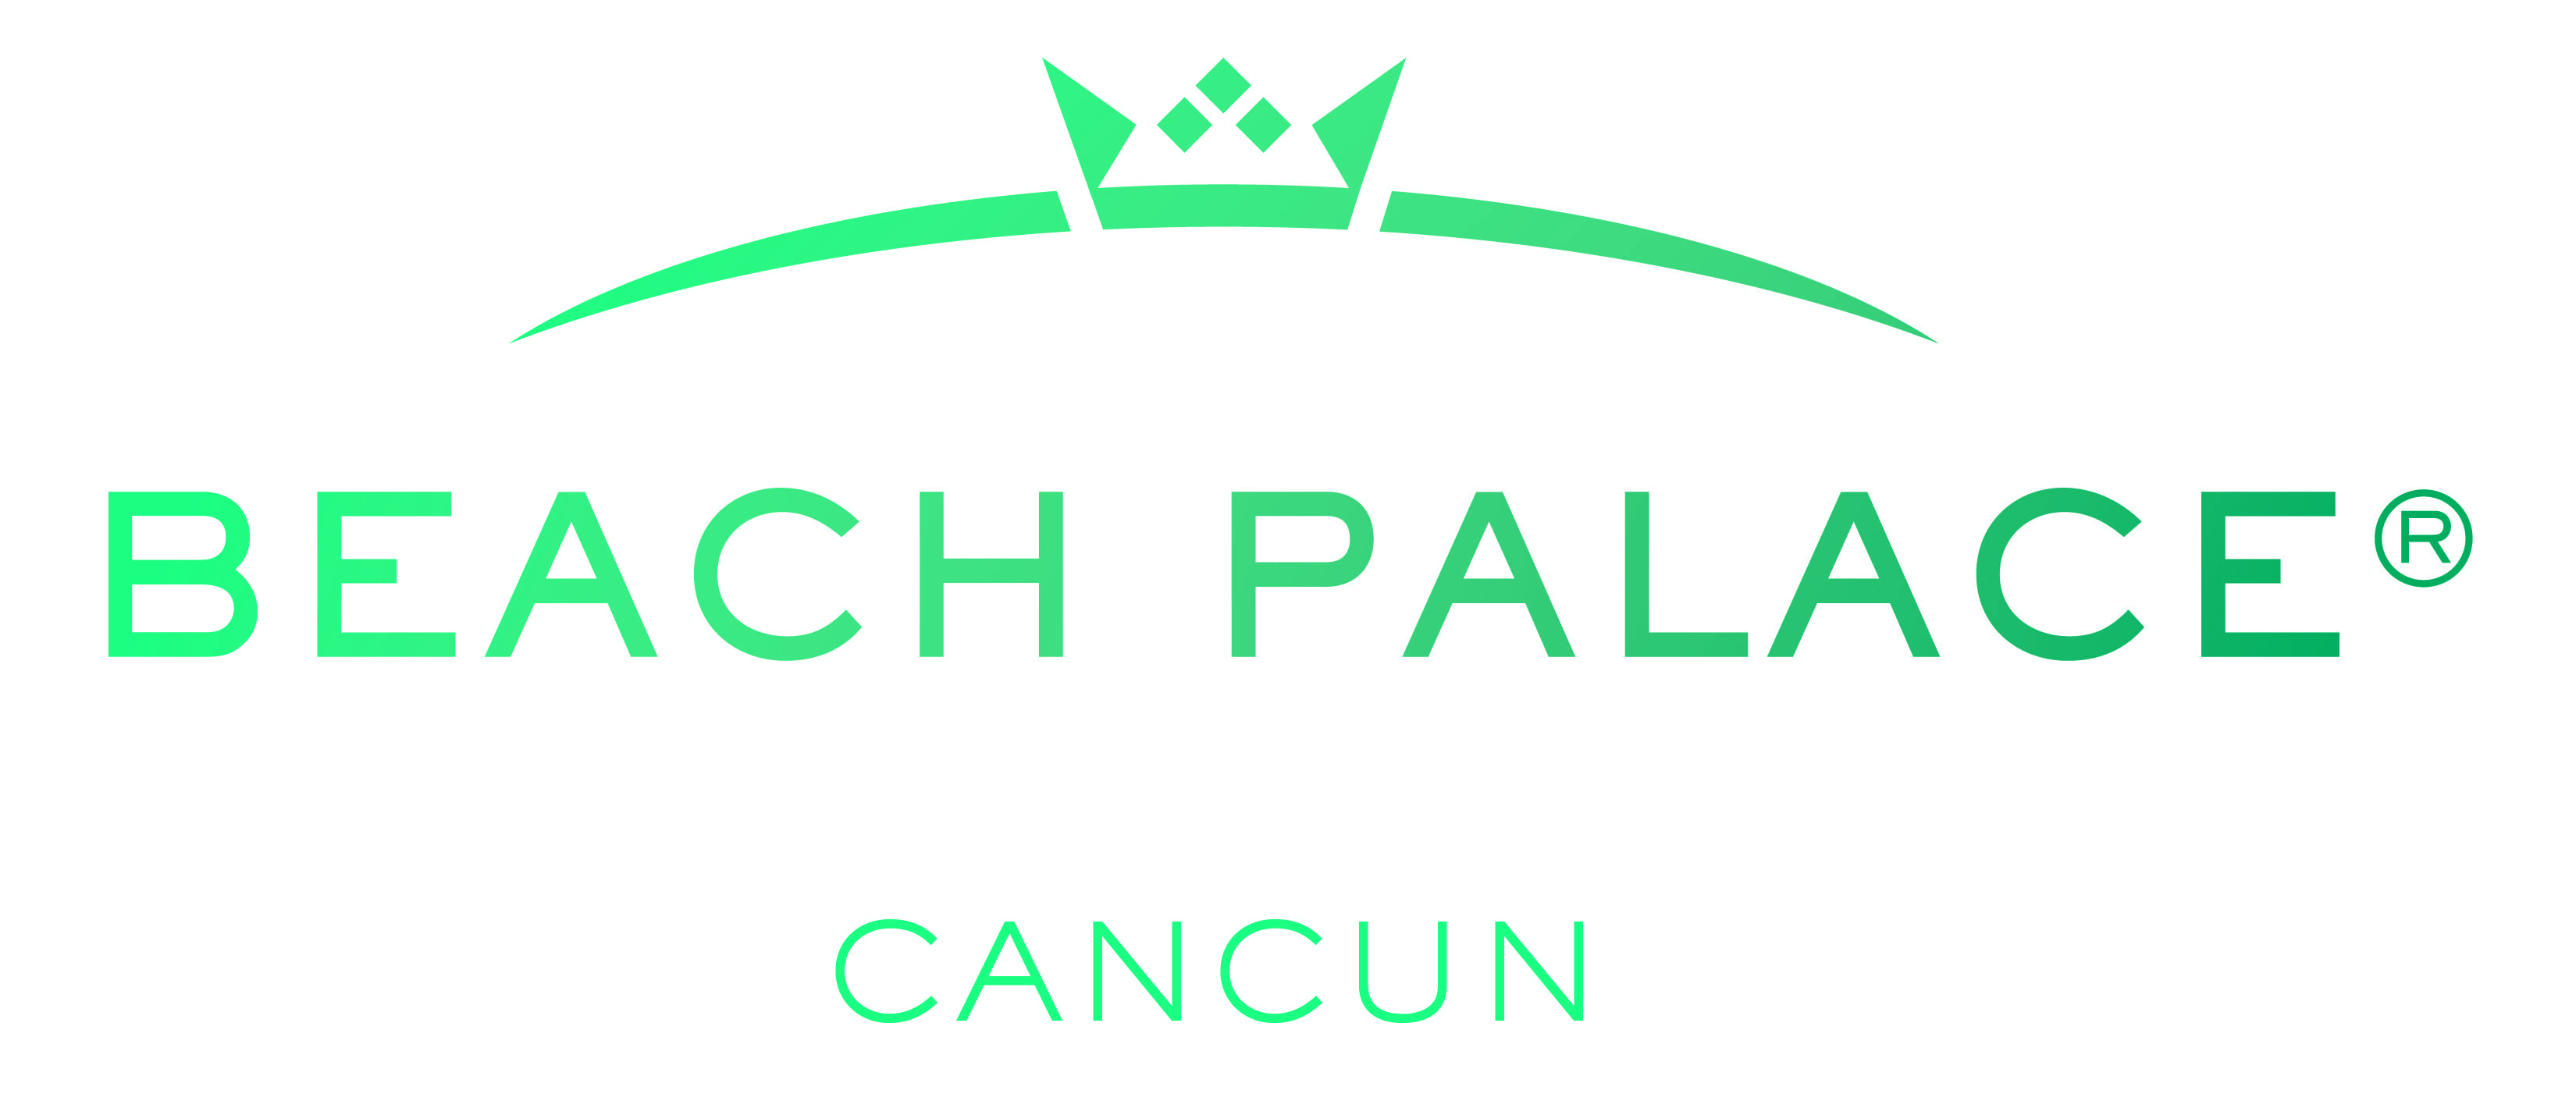 Palace Resorts Travel Specialist Logo - Beach Palace Resort - All-Inclusive Deals, Cancun Vacation Packages